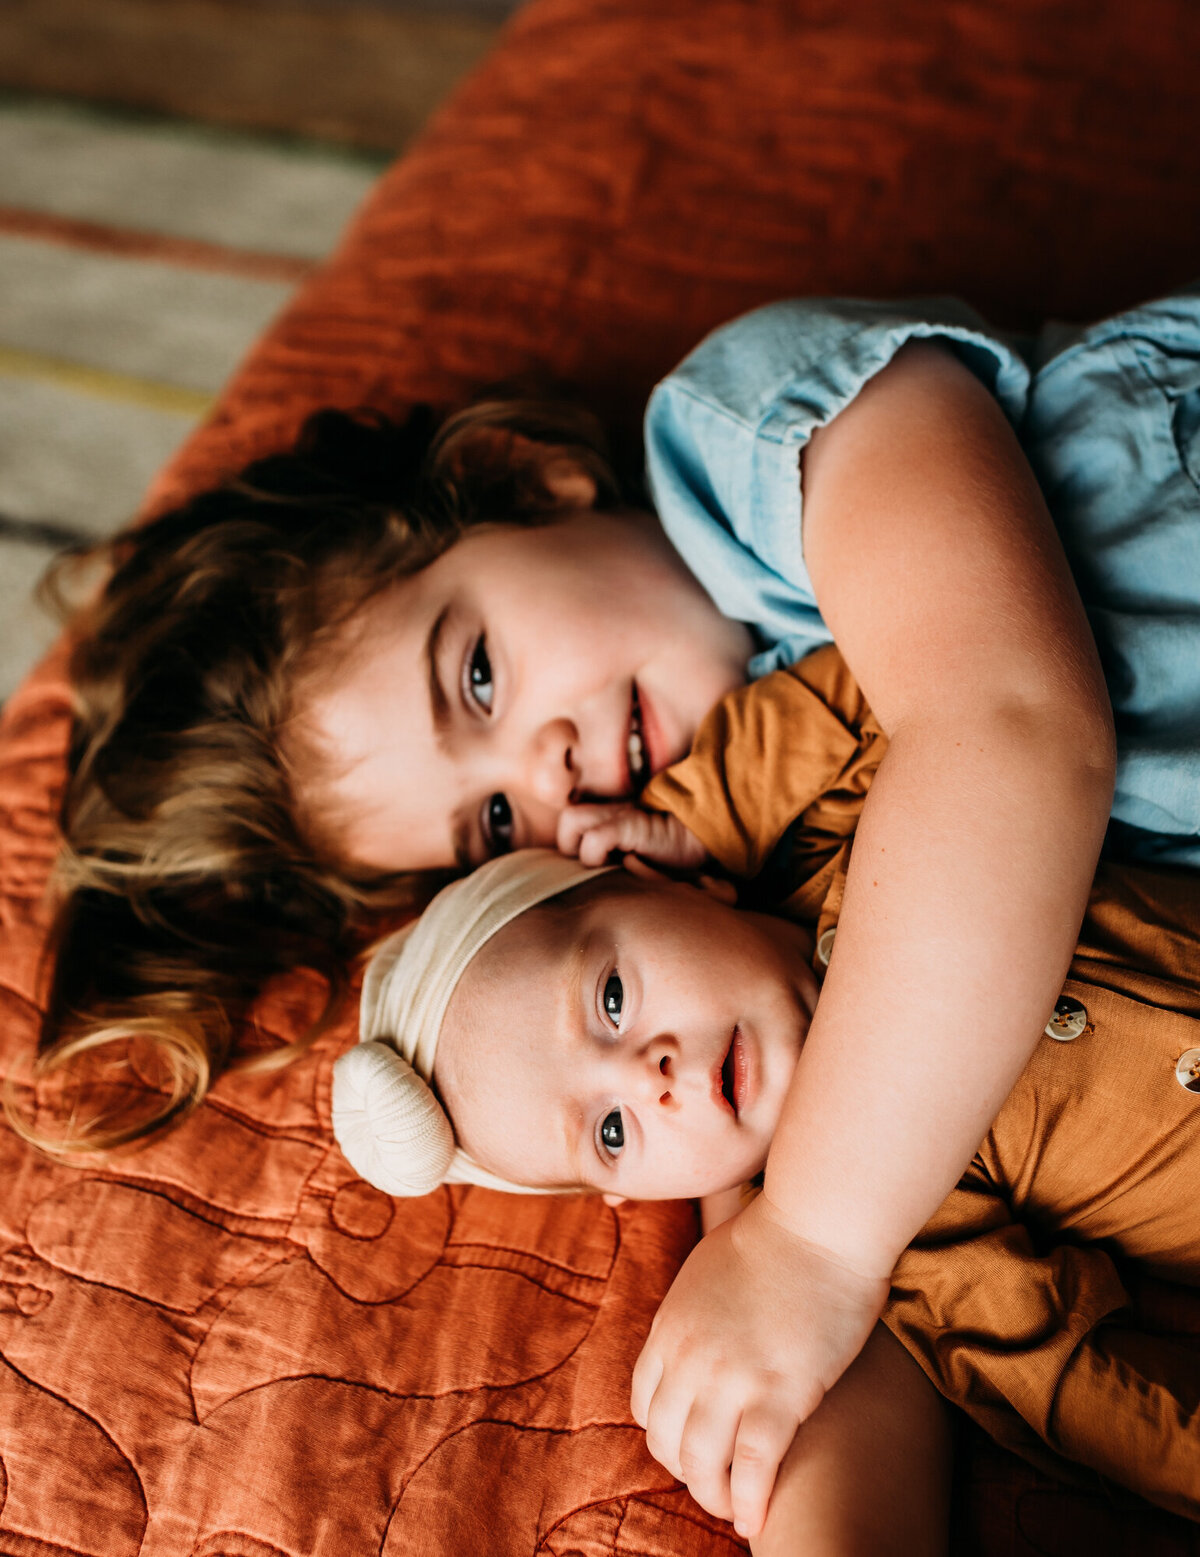 Newborn Photographer, Big sister snuggling baby sister on the bed.